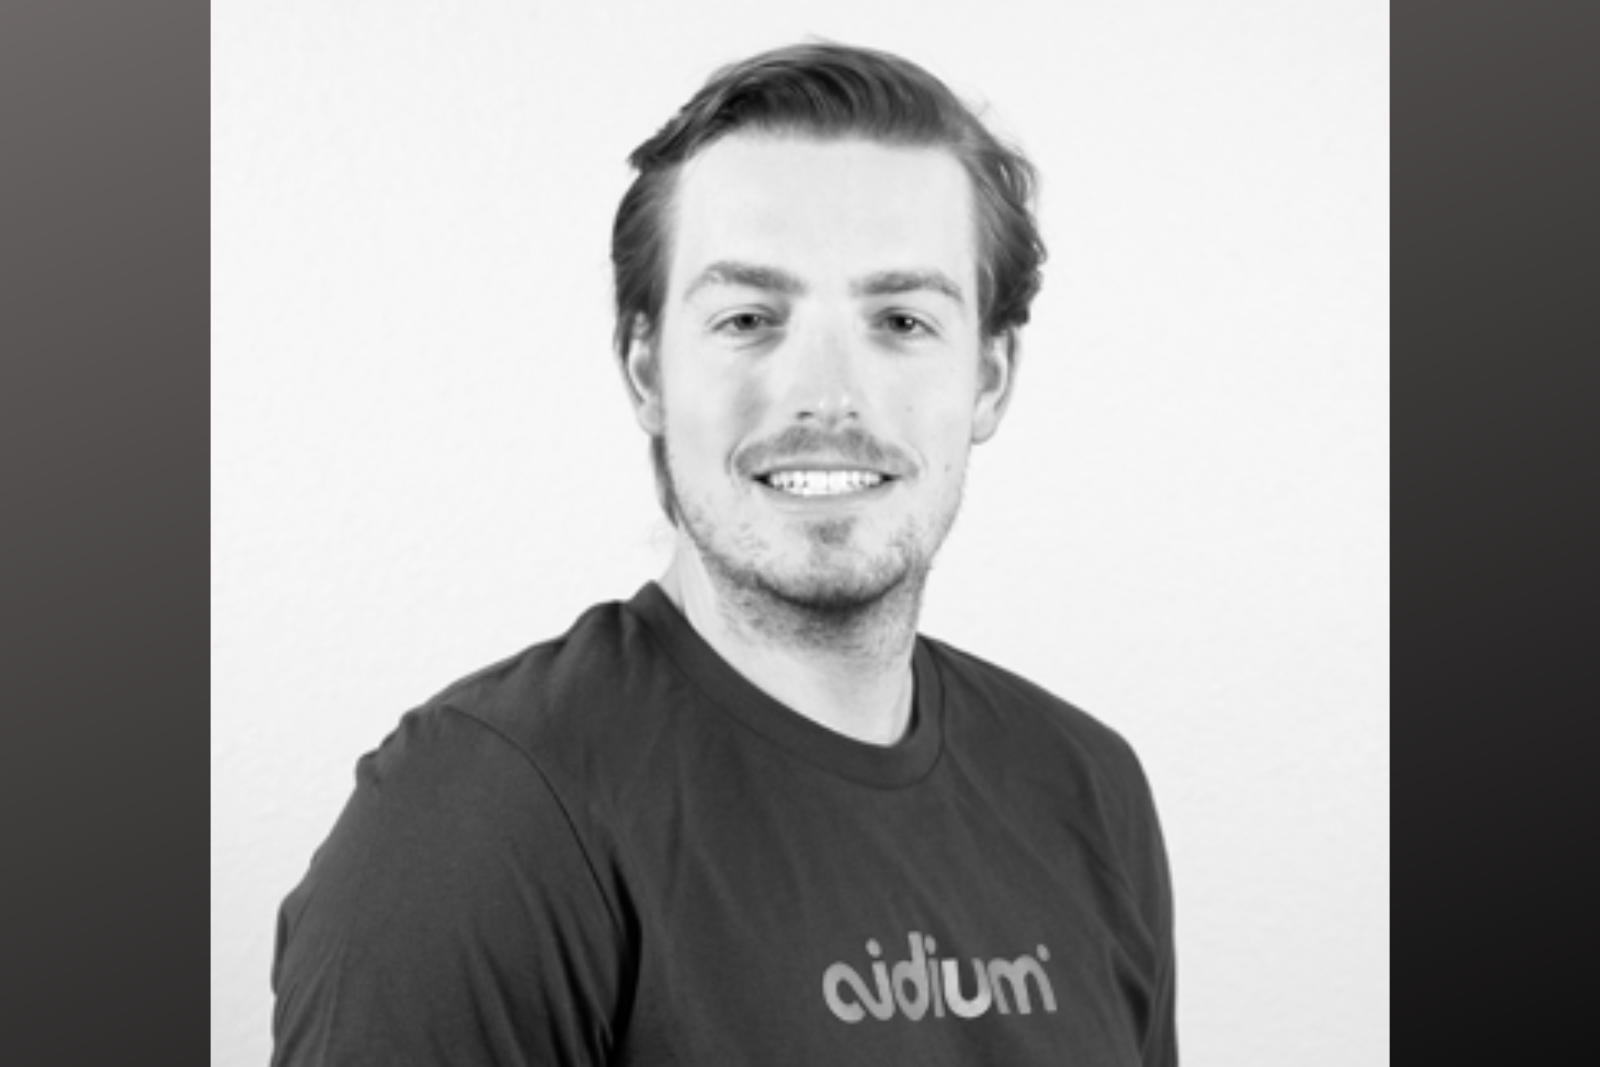 Aidium CEO: Our Mission Is To Help Mortgage Companies Succeed